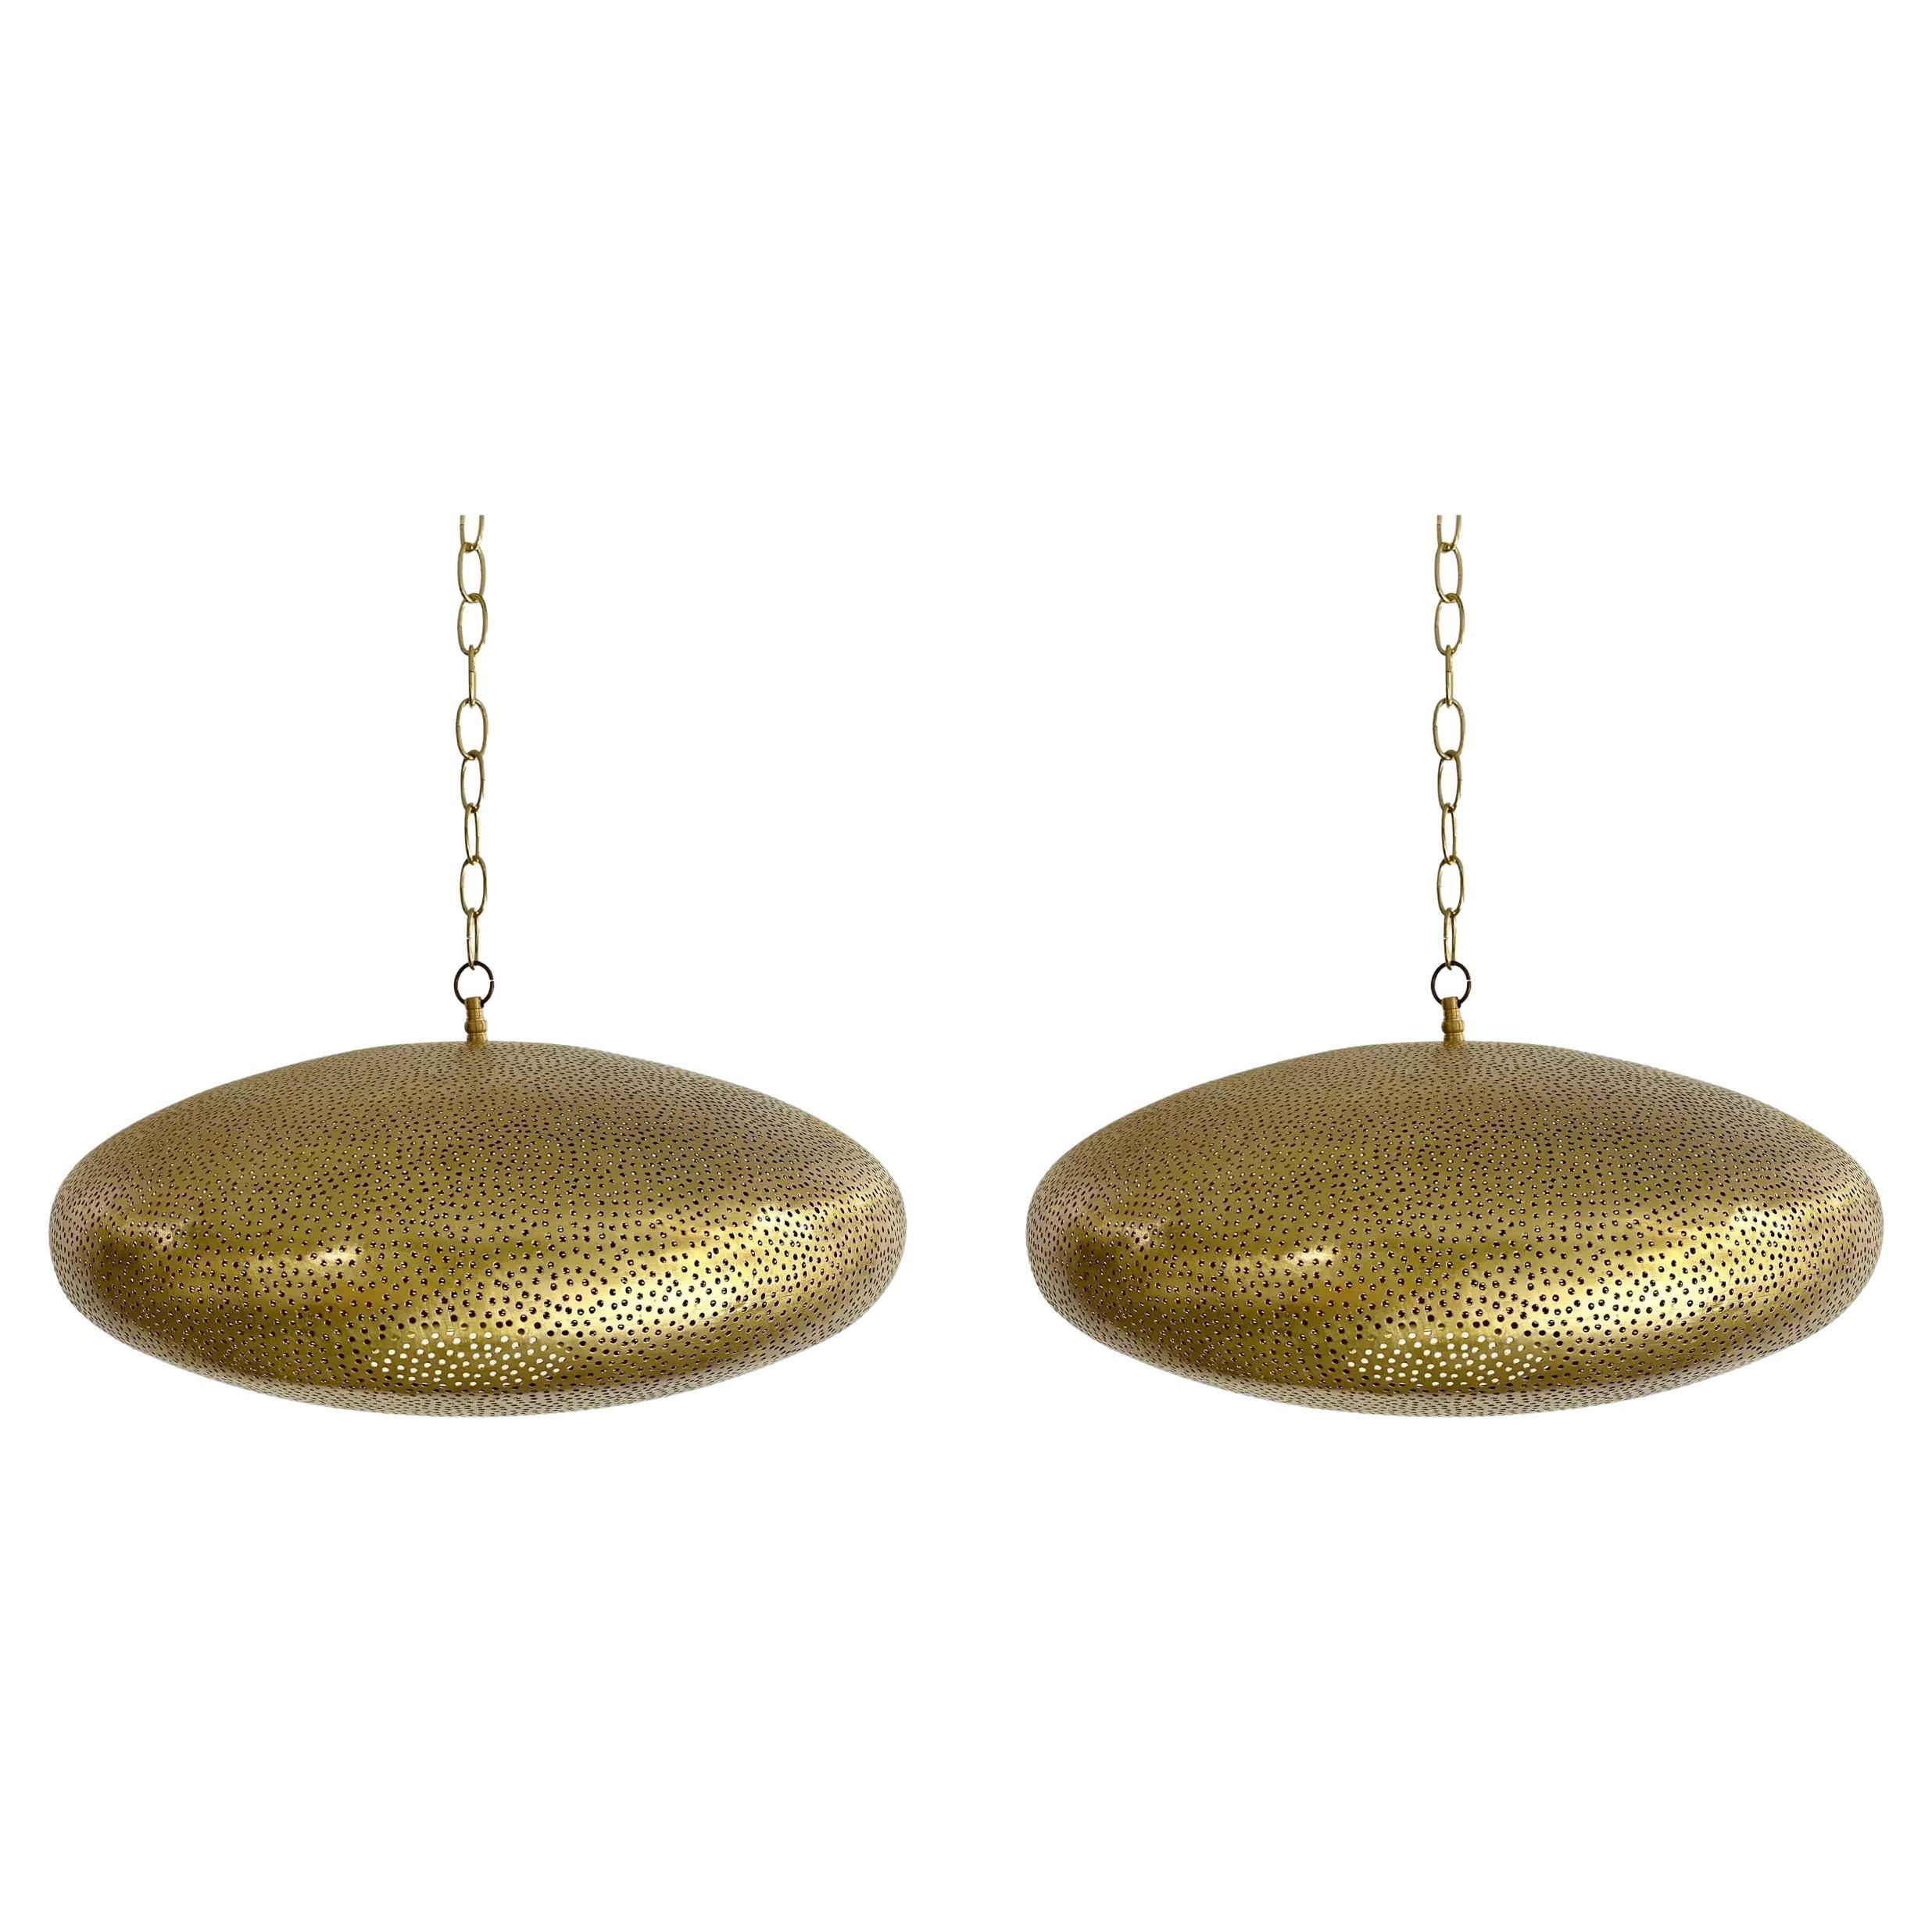 Mid- Century Modern Style Oval Spaceship Brass Pendant or Lantern, a Pair  For Sale